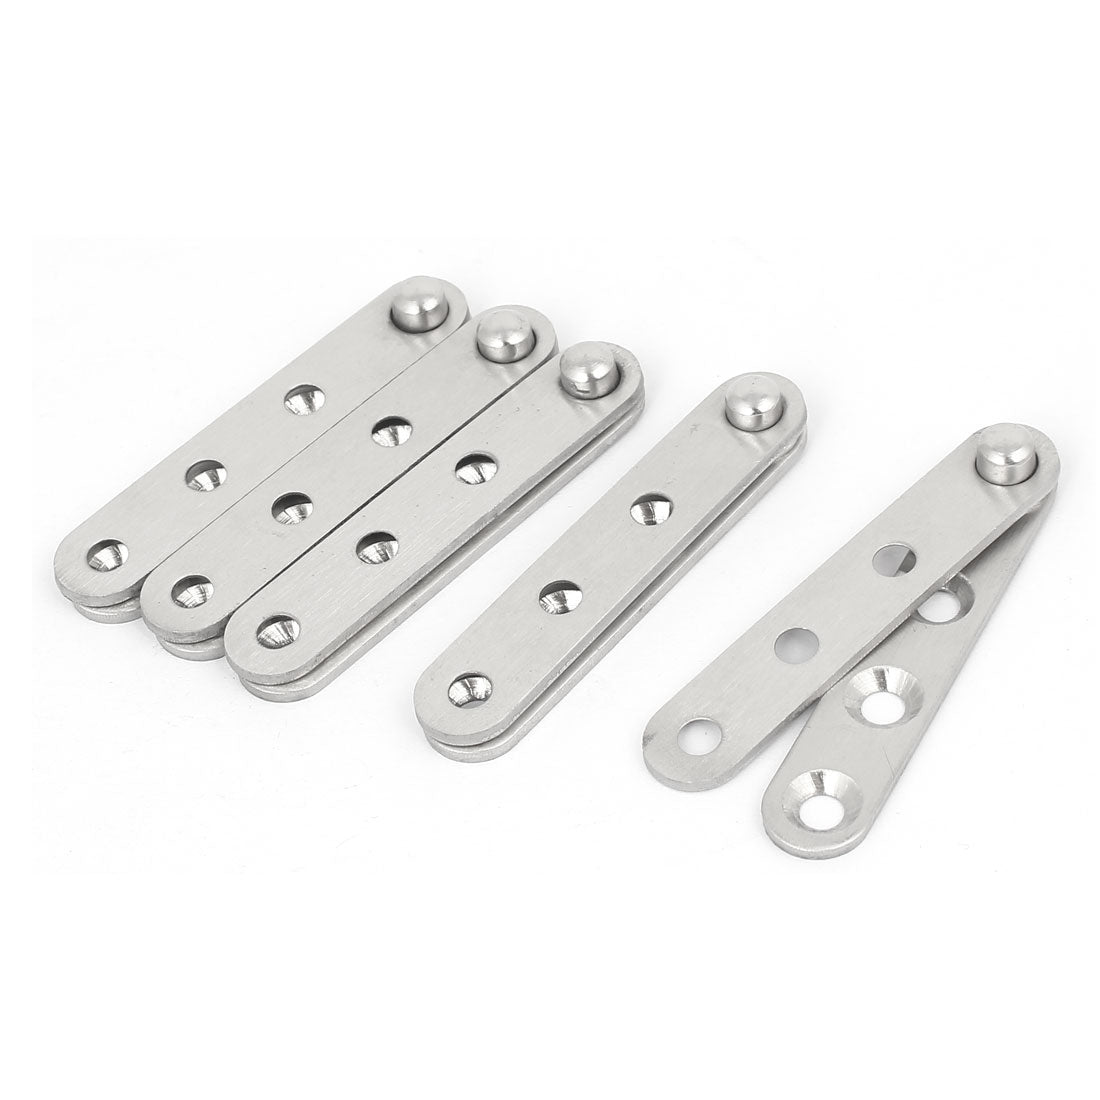 uxcell Uxcell 60mm x 11mm x 9mm Stainless Steel 360 Degree Rotating Door Pivot Hinge 5pcs